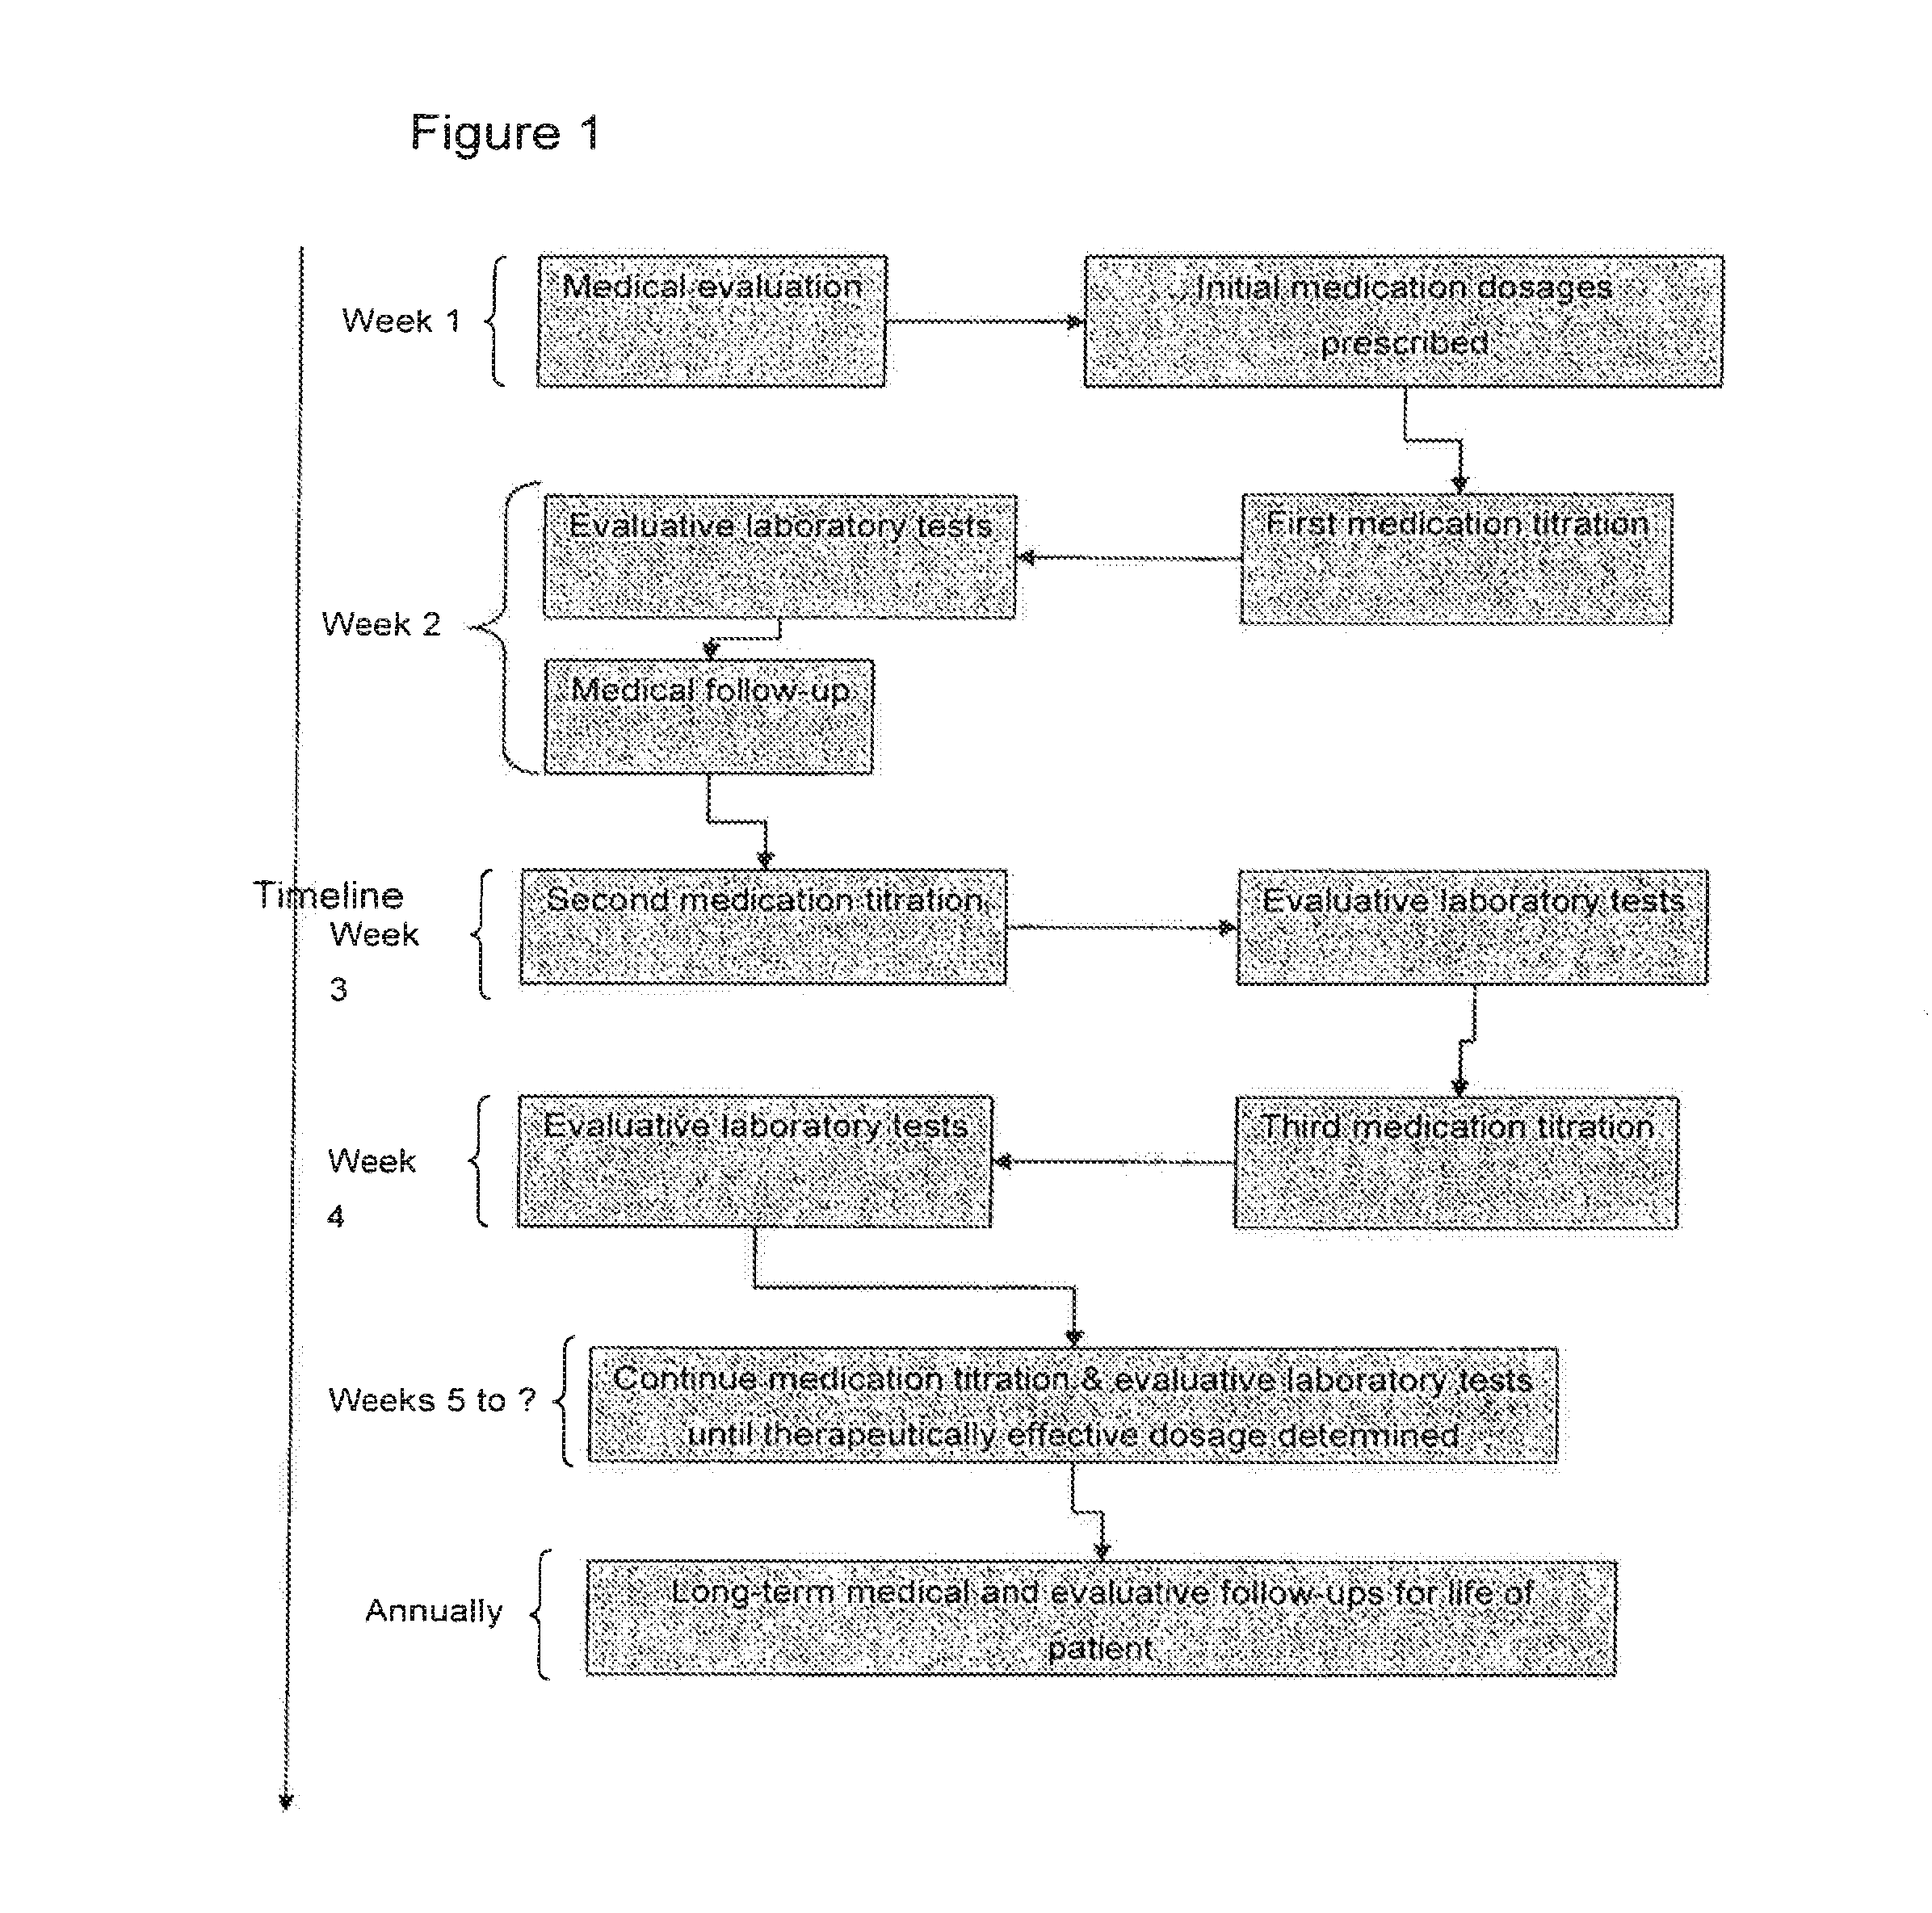 Novel compositions comprising a phosphodiesterase-5 inhibitor and their use in methods of treatment